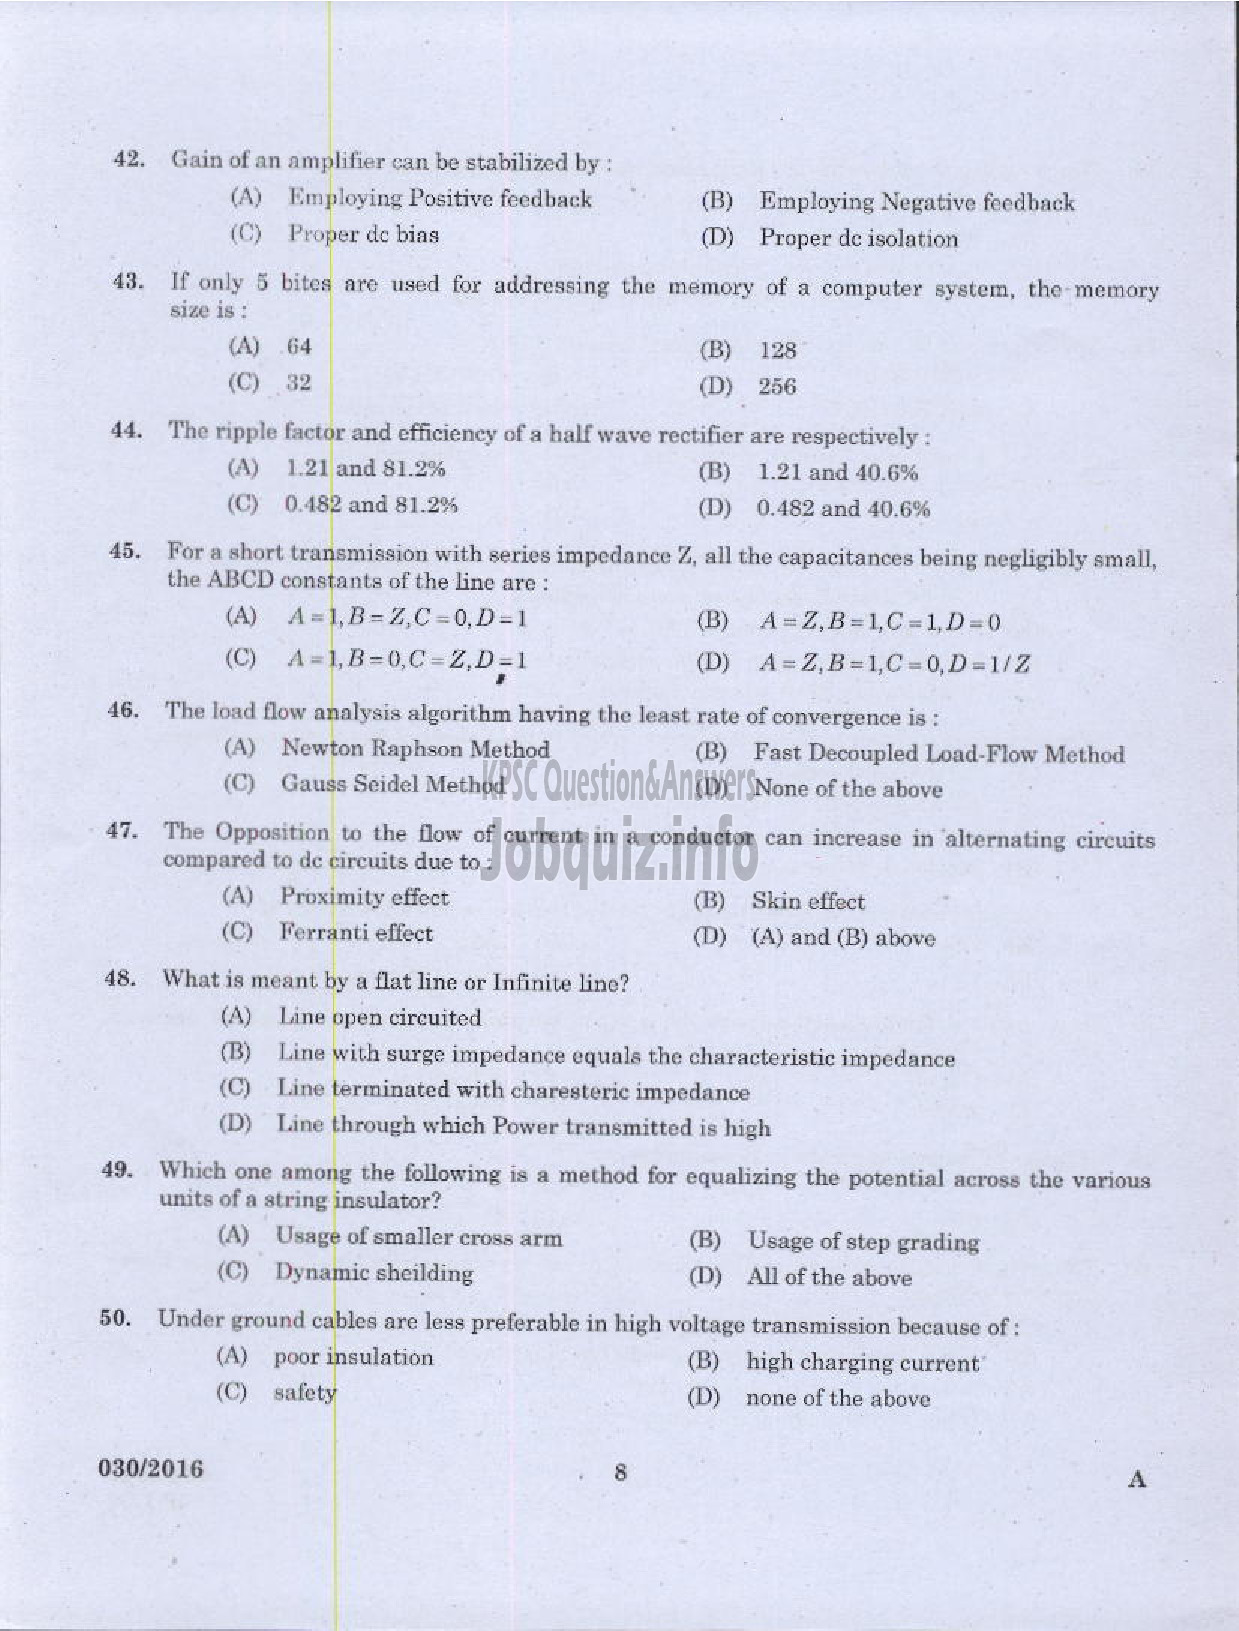 Kerala PSC Question Paper - ASSISTANT ENGINEER ELECTRICAL HARBOUR ENGINEERING-6